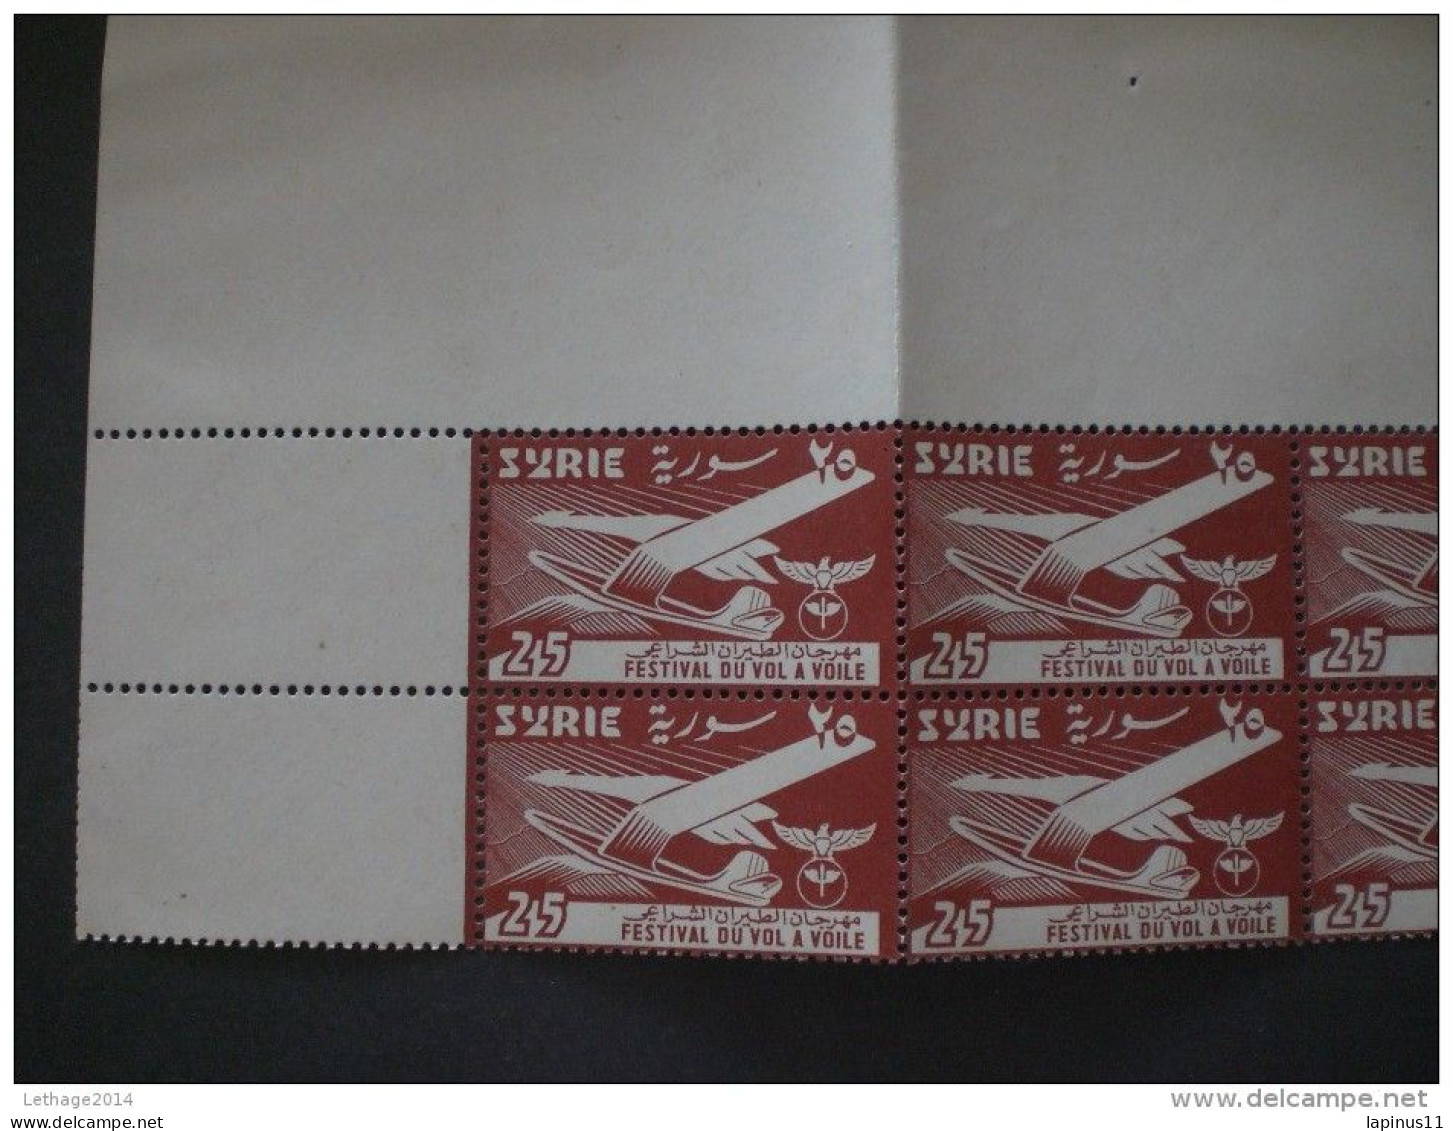 SYRIE سوريا SYRIA 1957 Airmail -Gliding Festival WM:1 MNH 10 SERY COMPLETE ERROR WMK REVERSED - Syrien